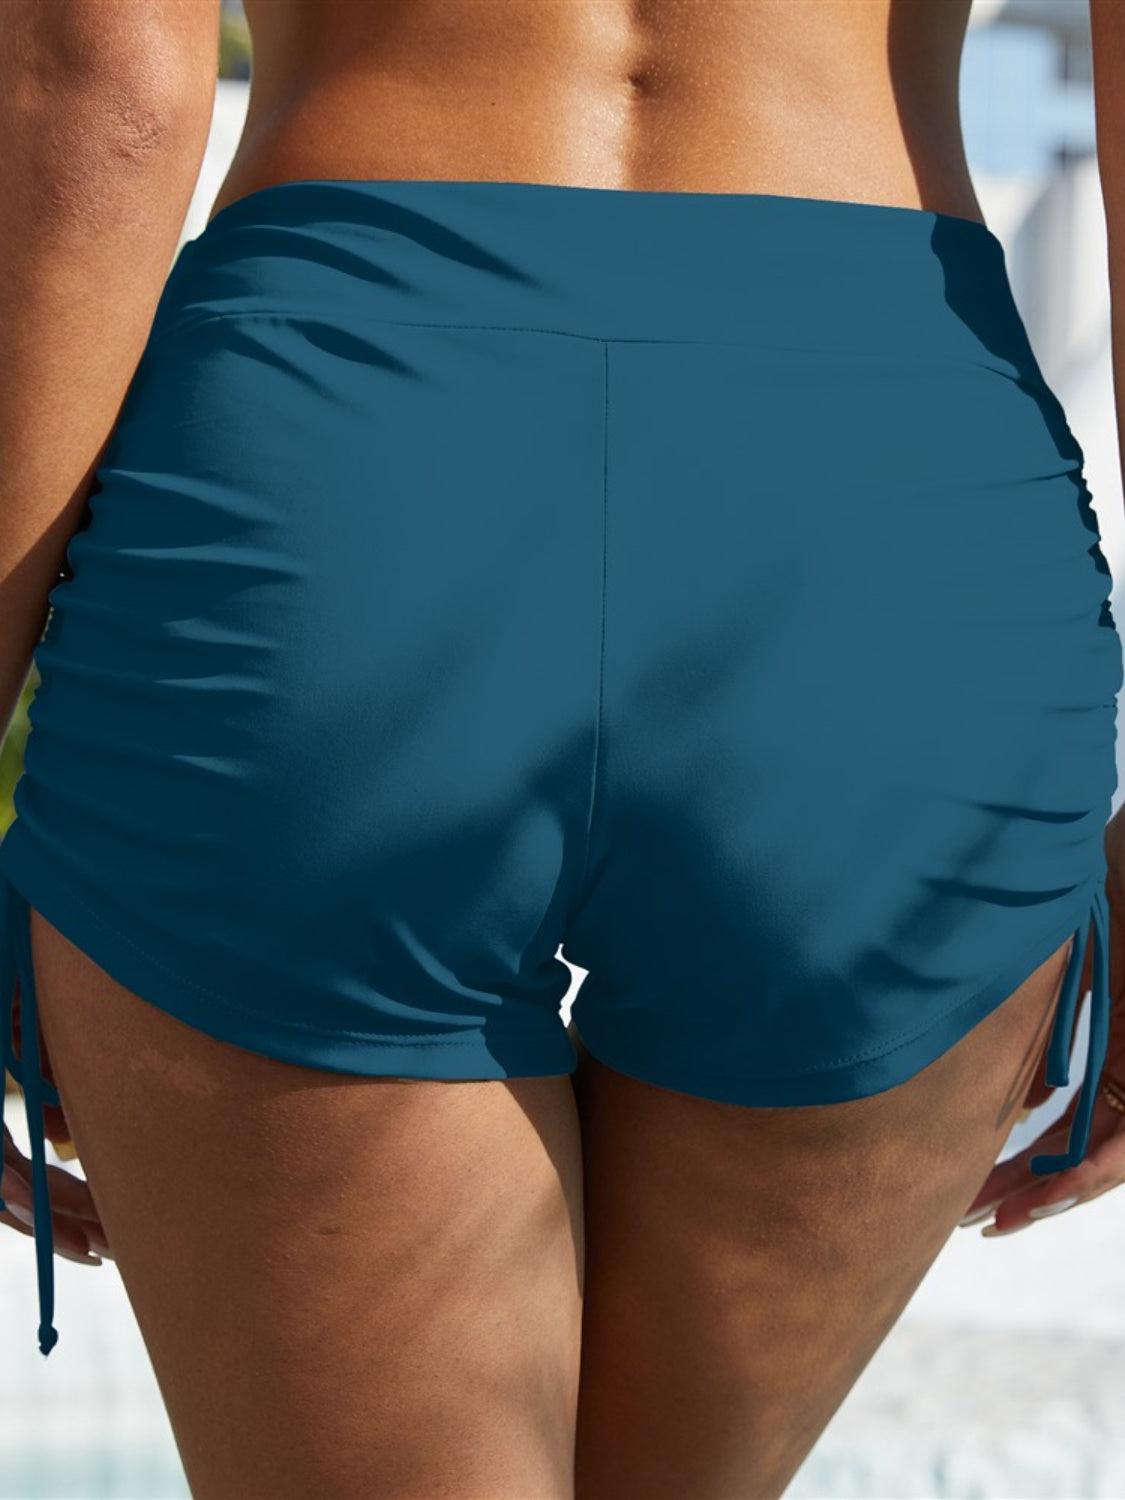 a close up of a person wearing a blue swimsuit